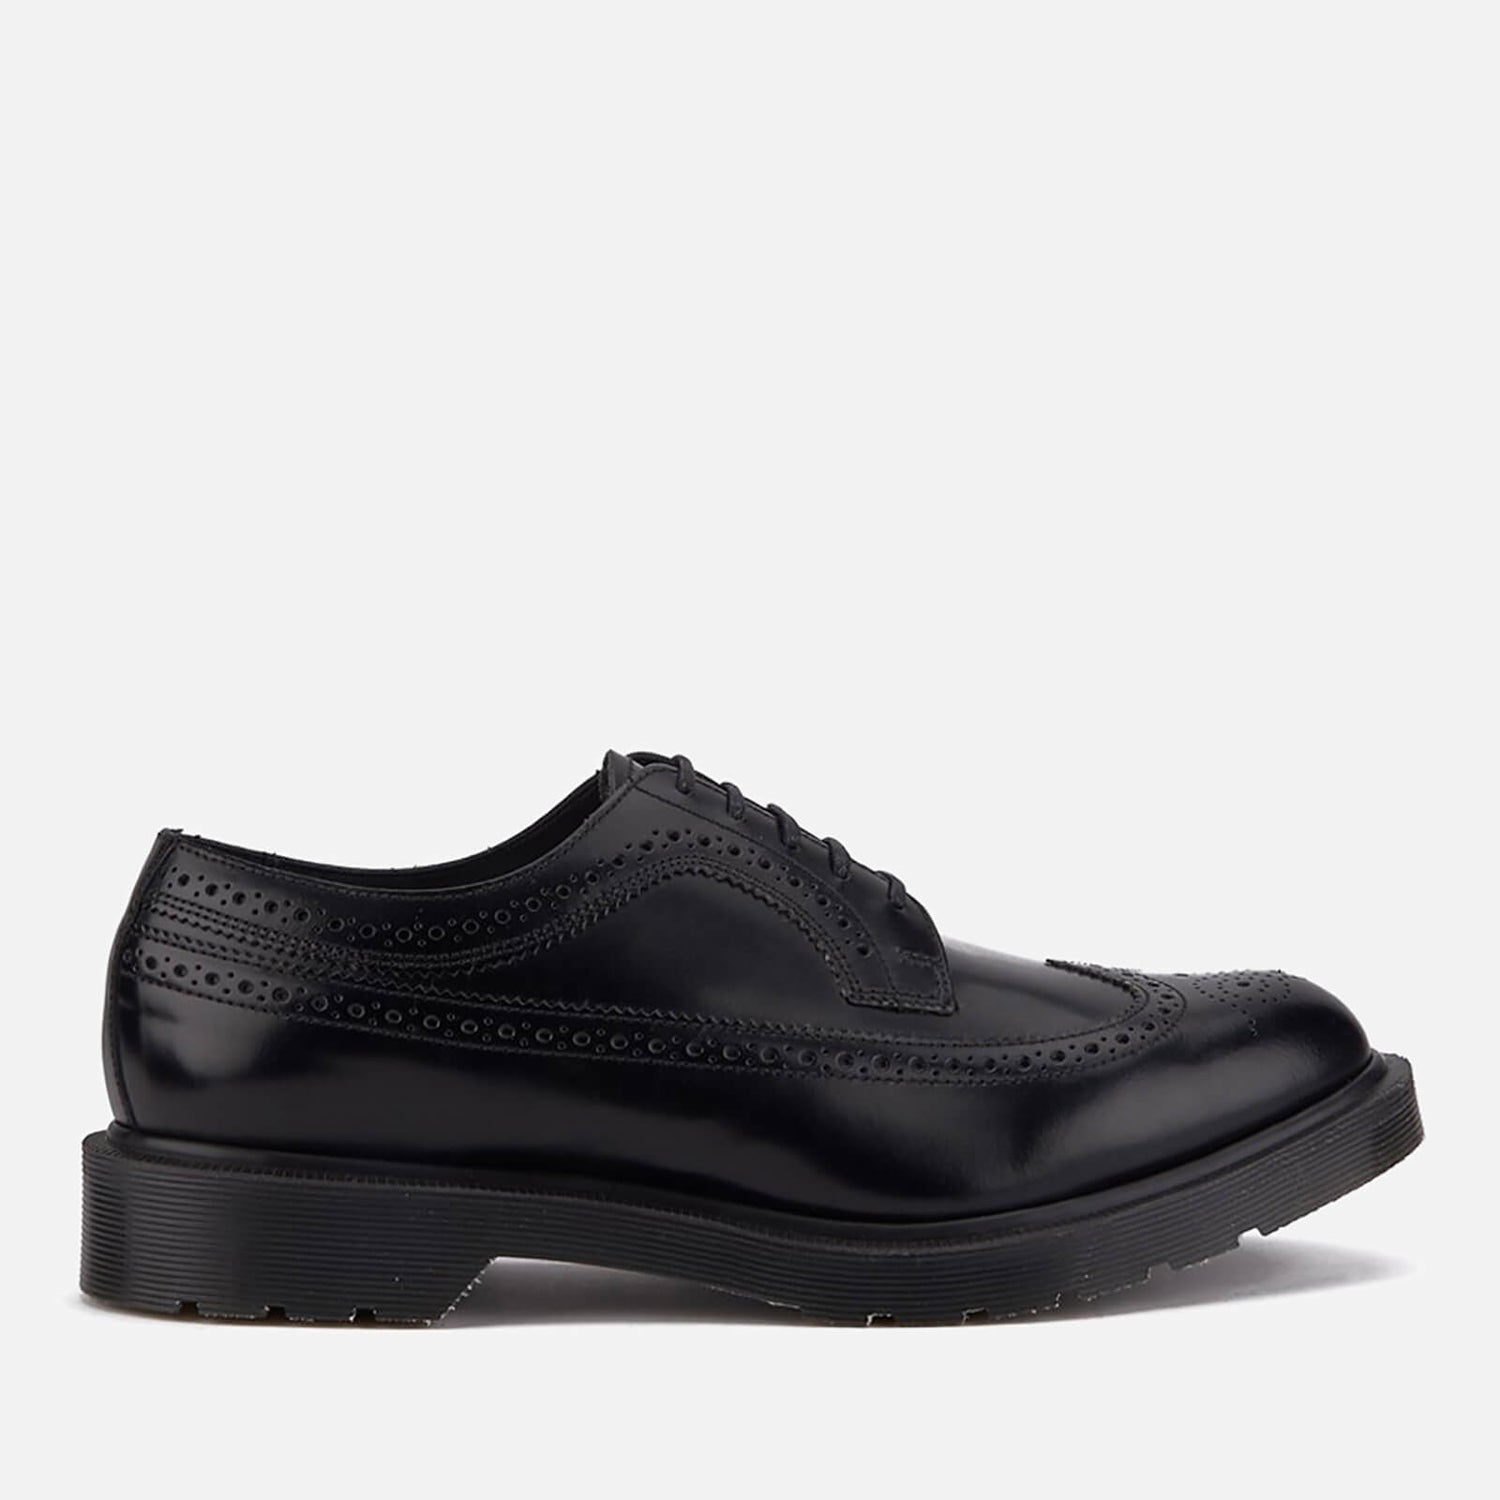 Dr. Martens Men's 'Made in England' 3989 Leather Brogues - Black Boanil ...